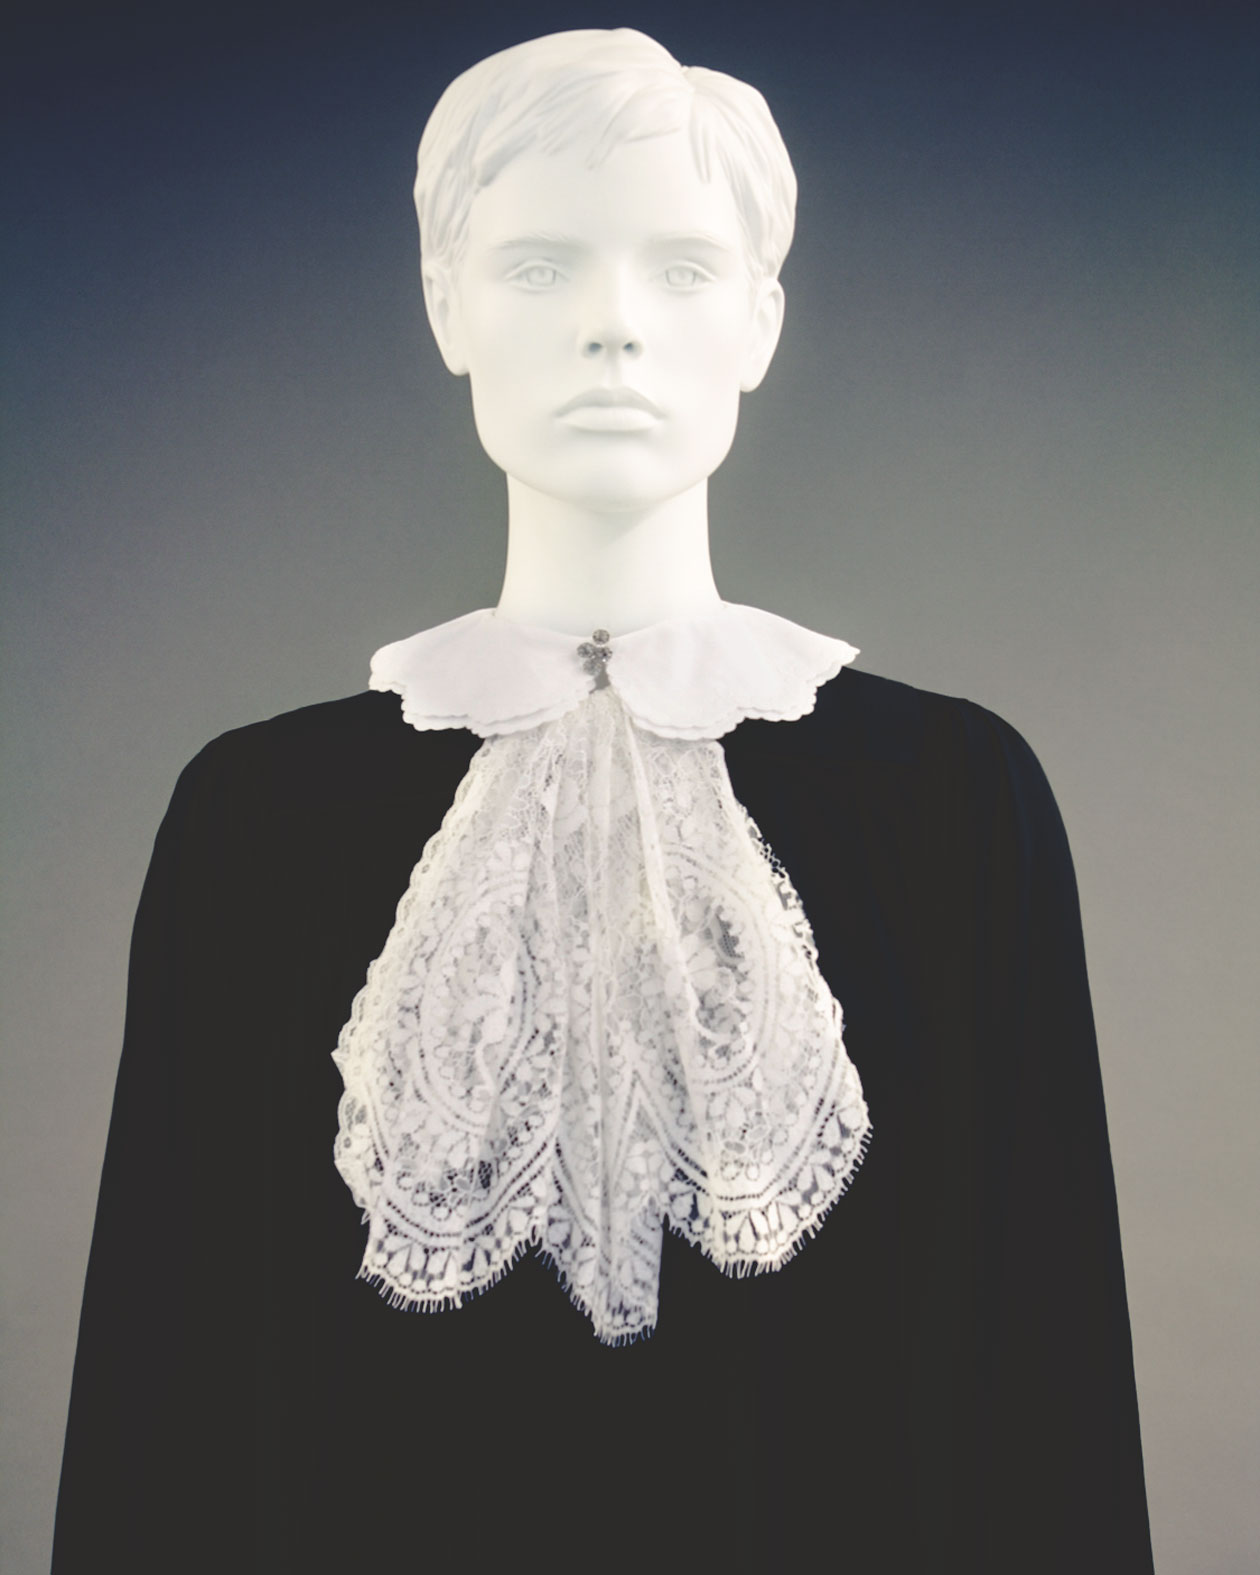 A white lace judicial collar shown on a mannequin wearing a black robe.